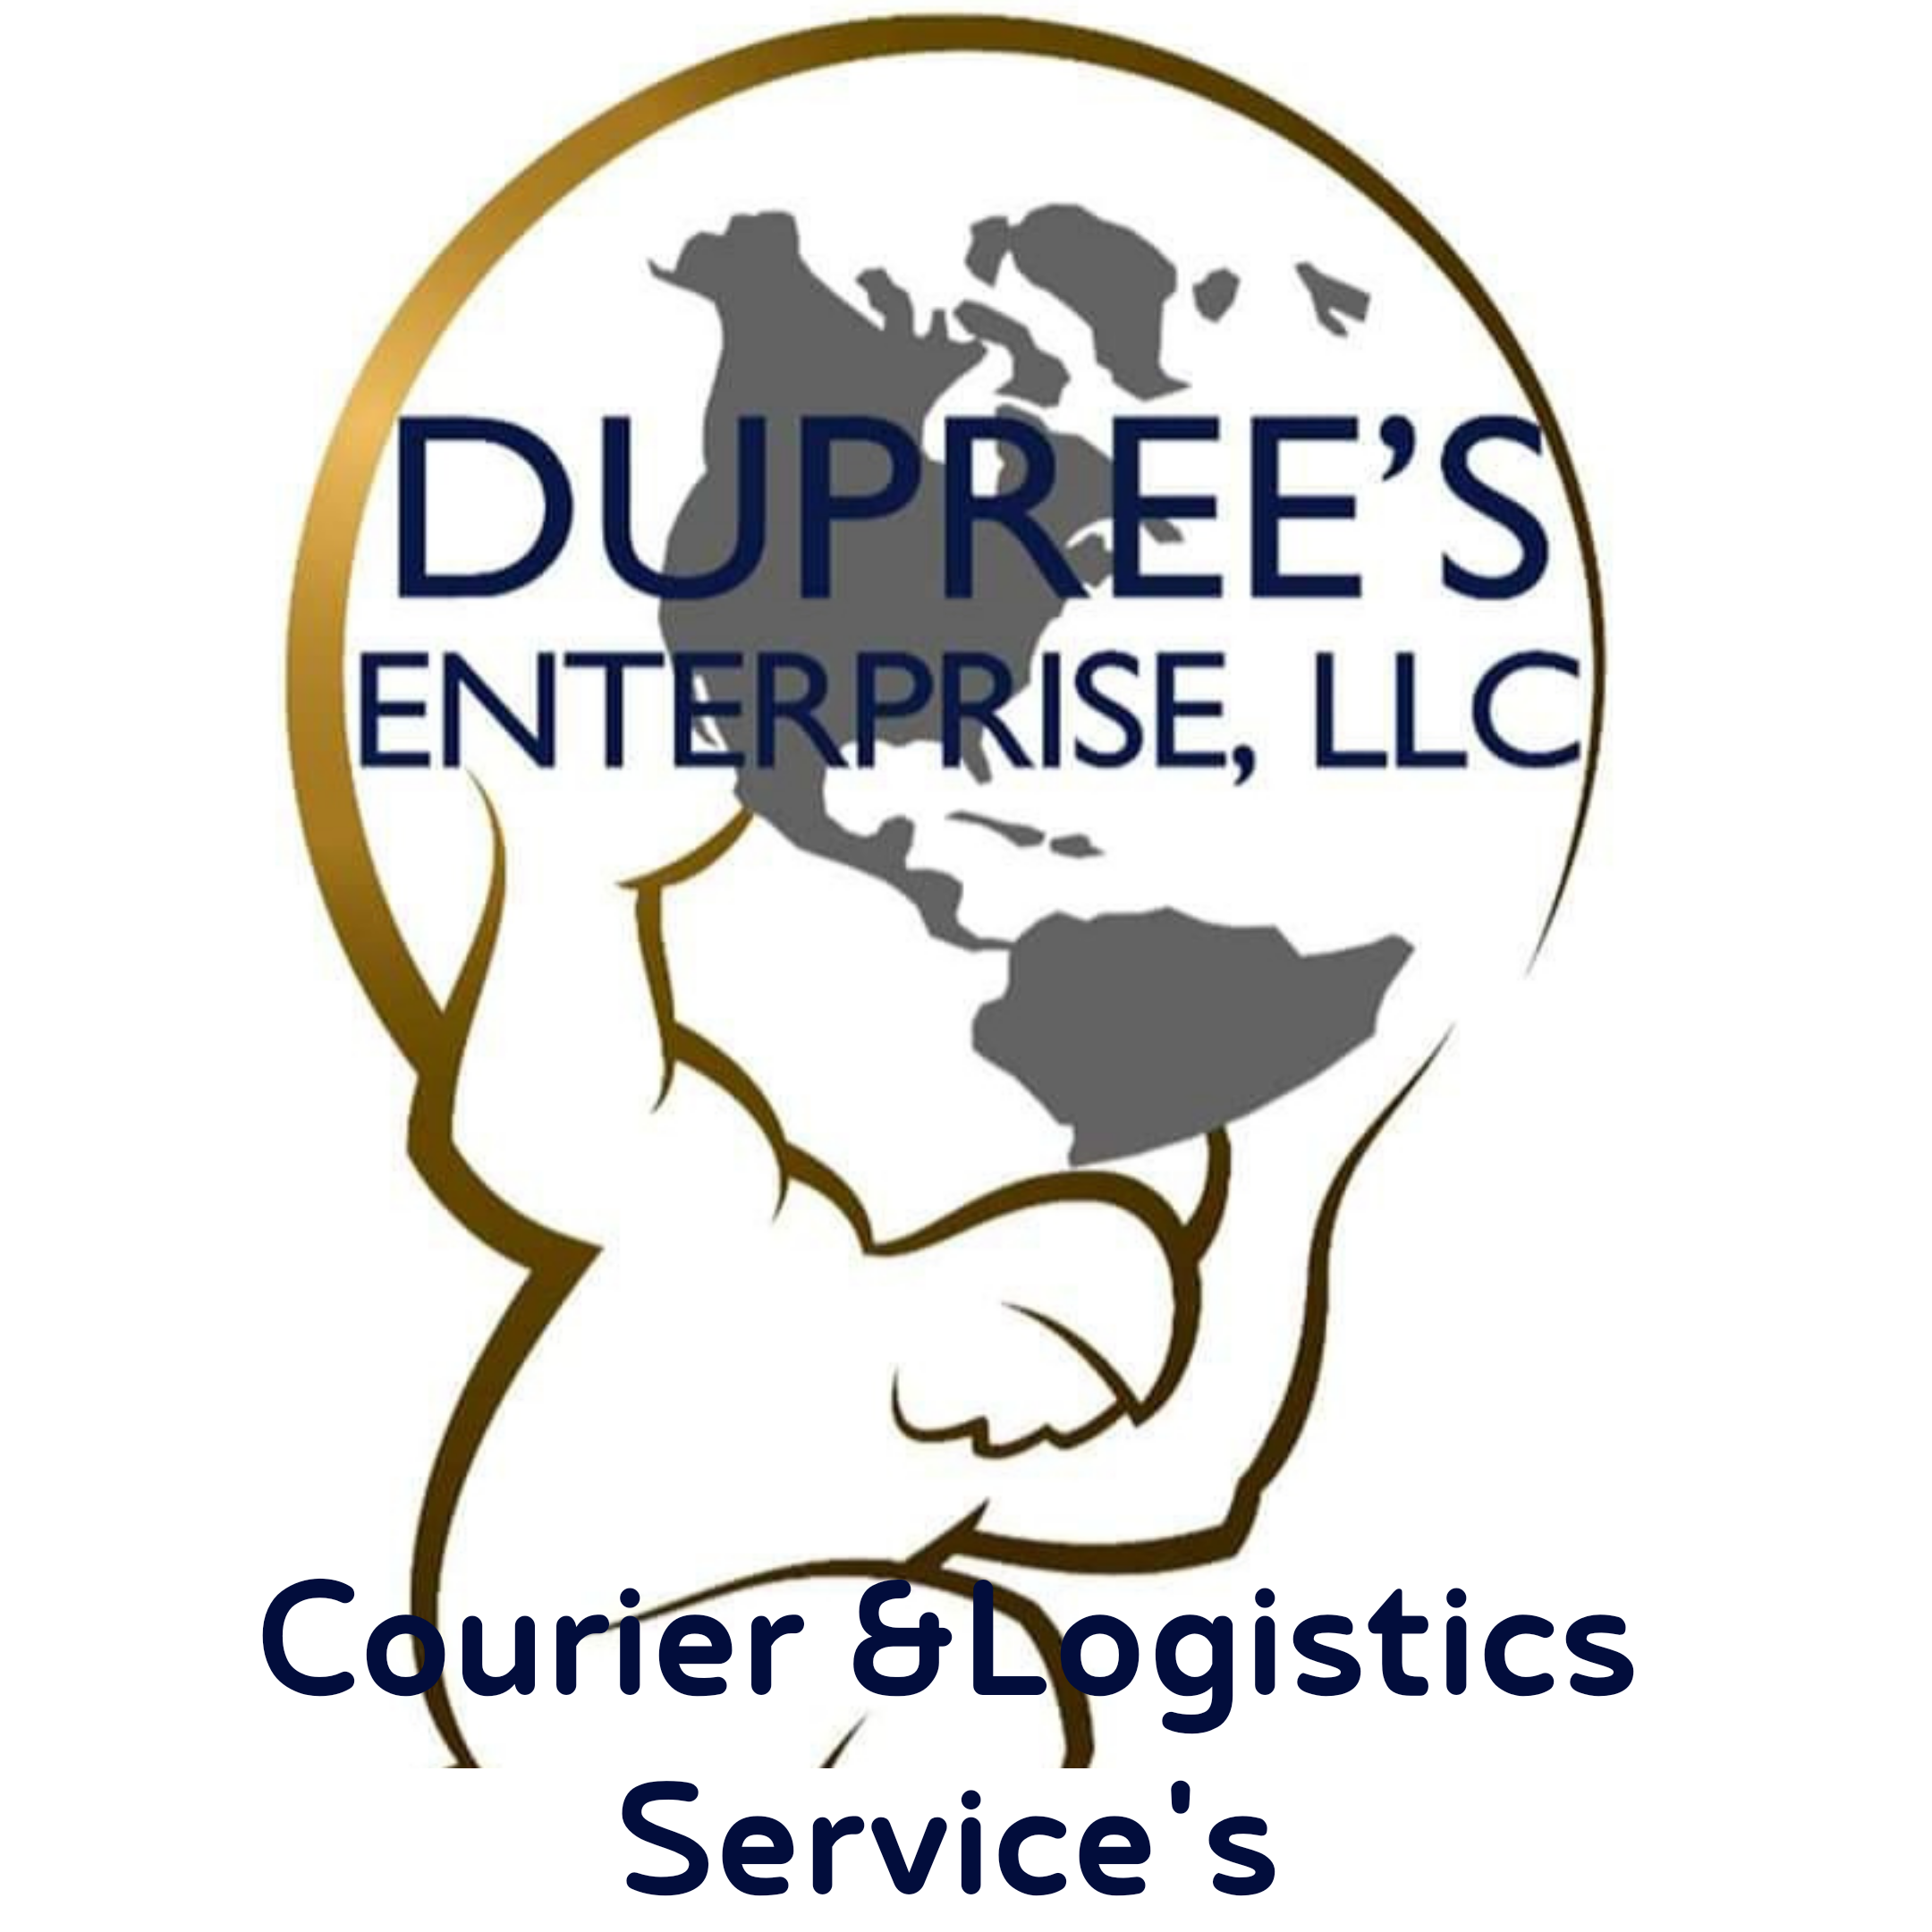 Greenville Corporate Delivery services